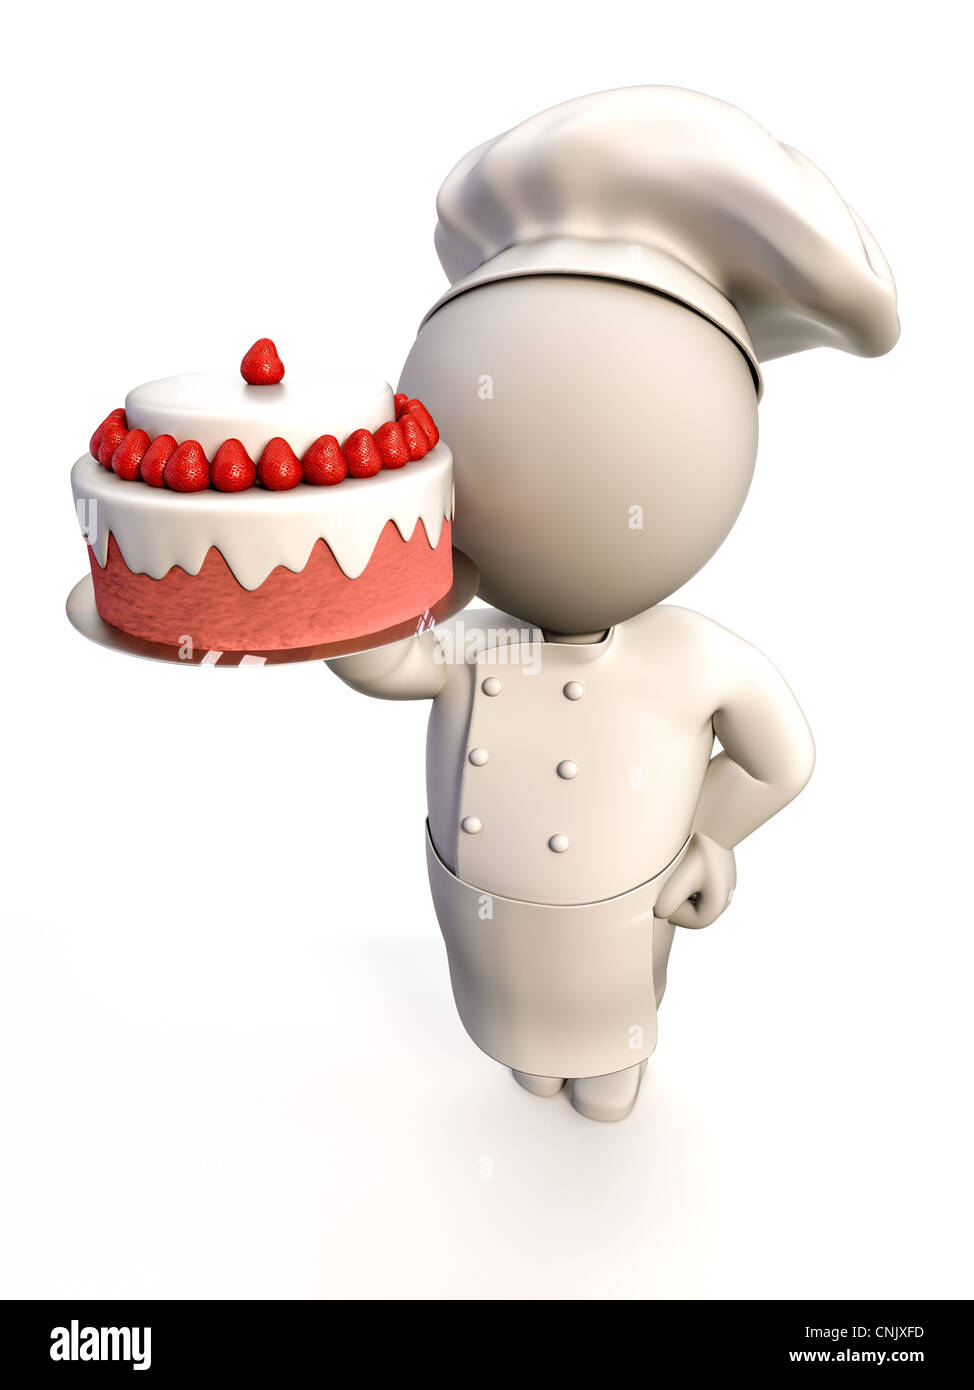 A baker proudly showing a strawberry shortcake Stock Photo